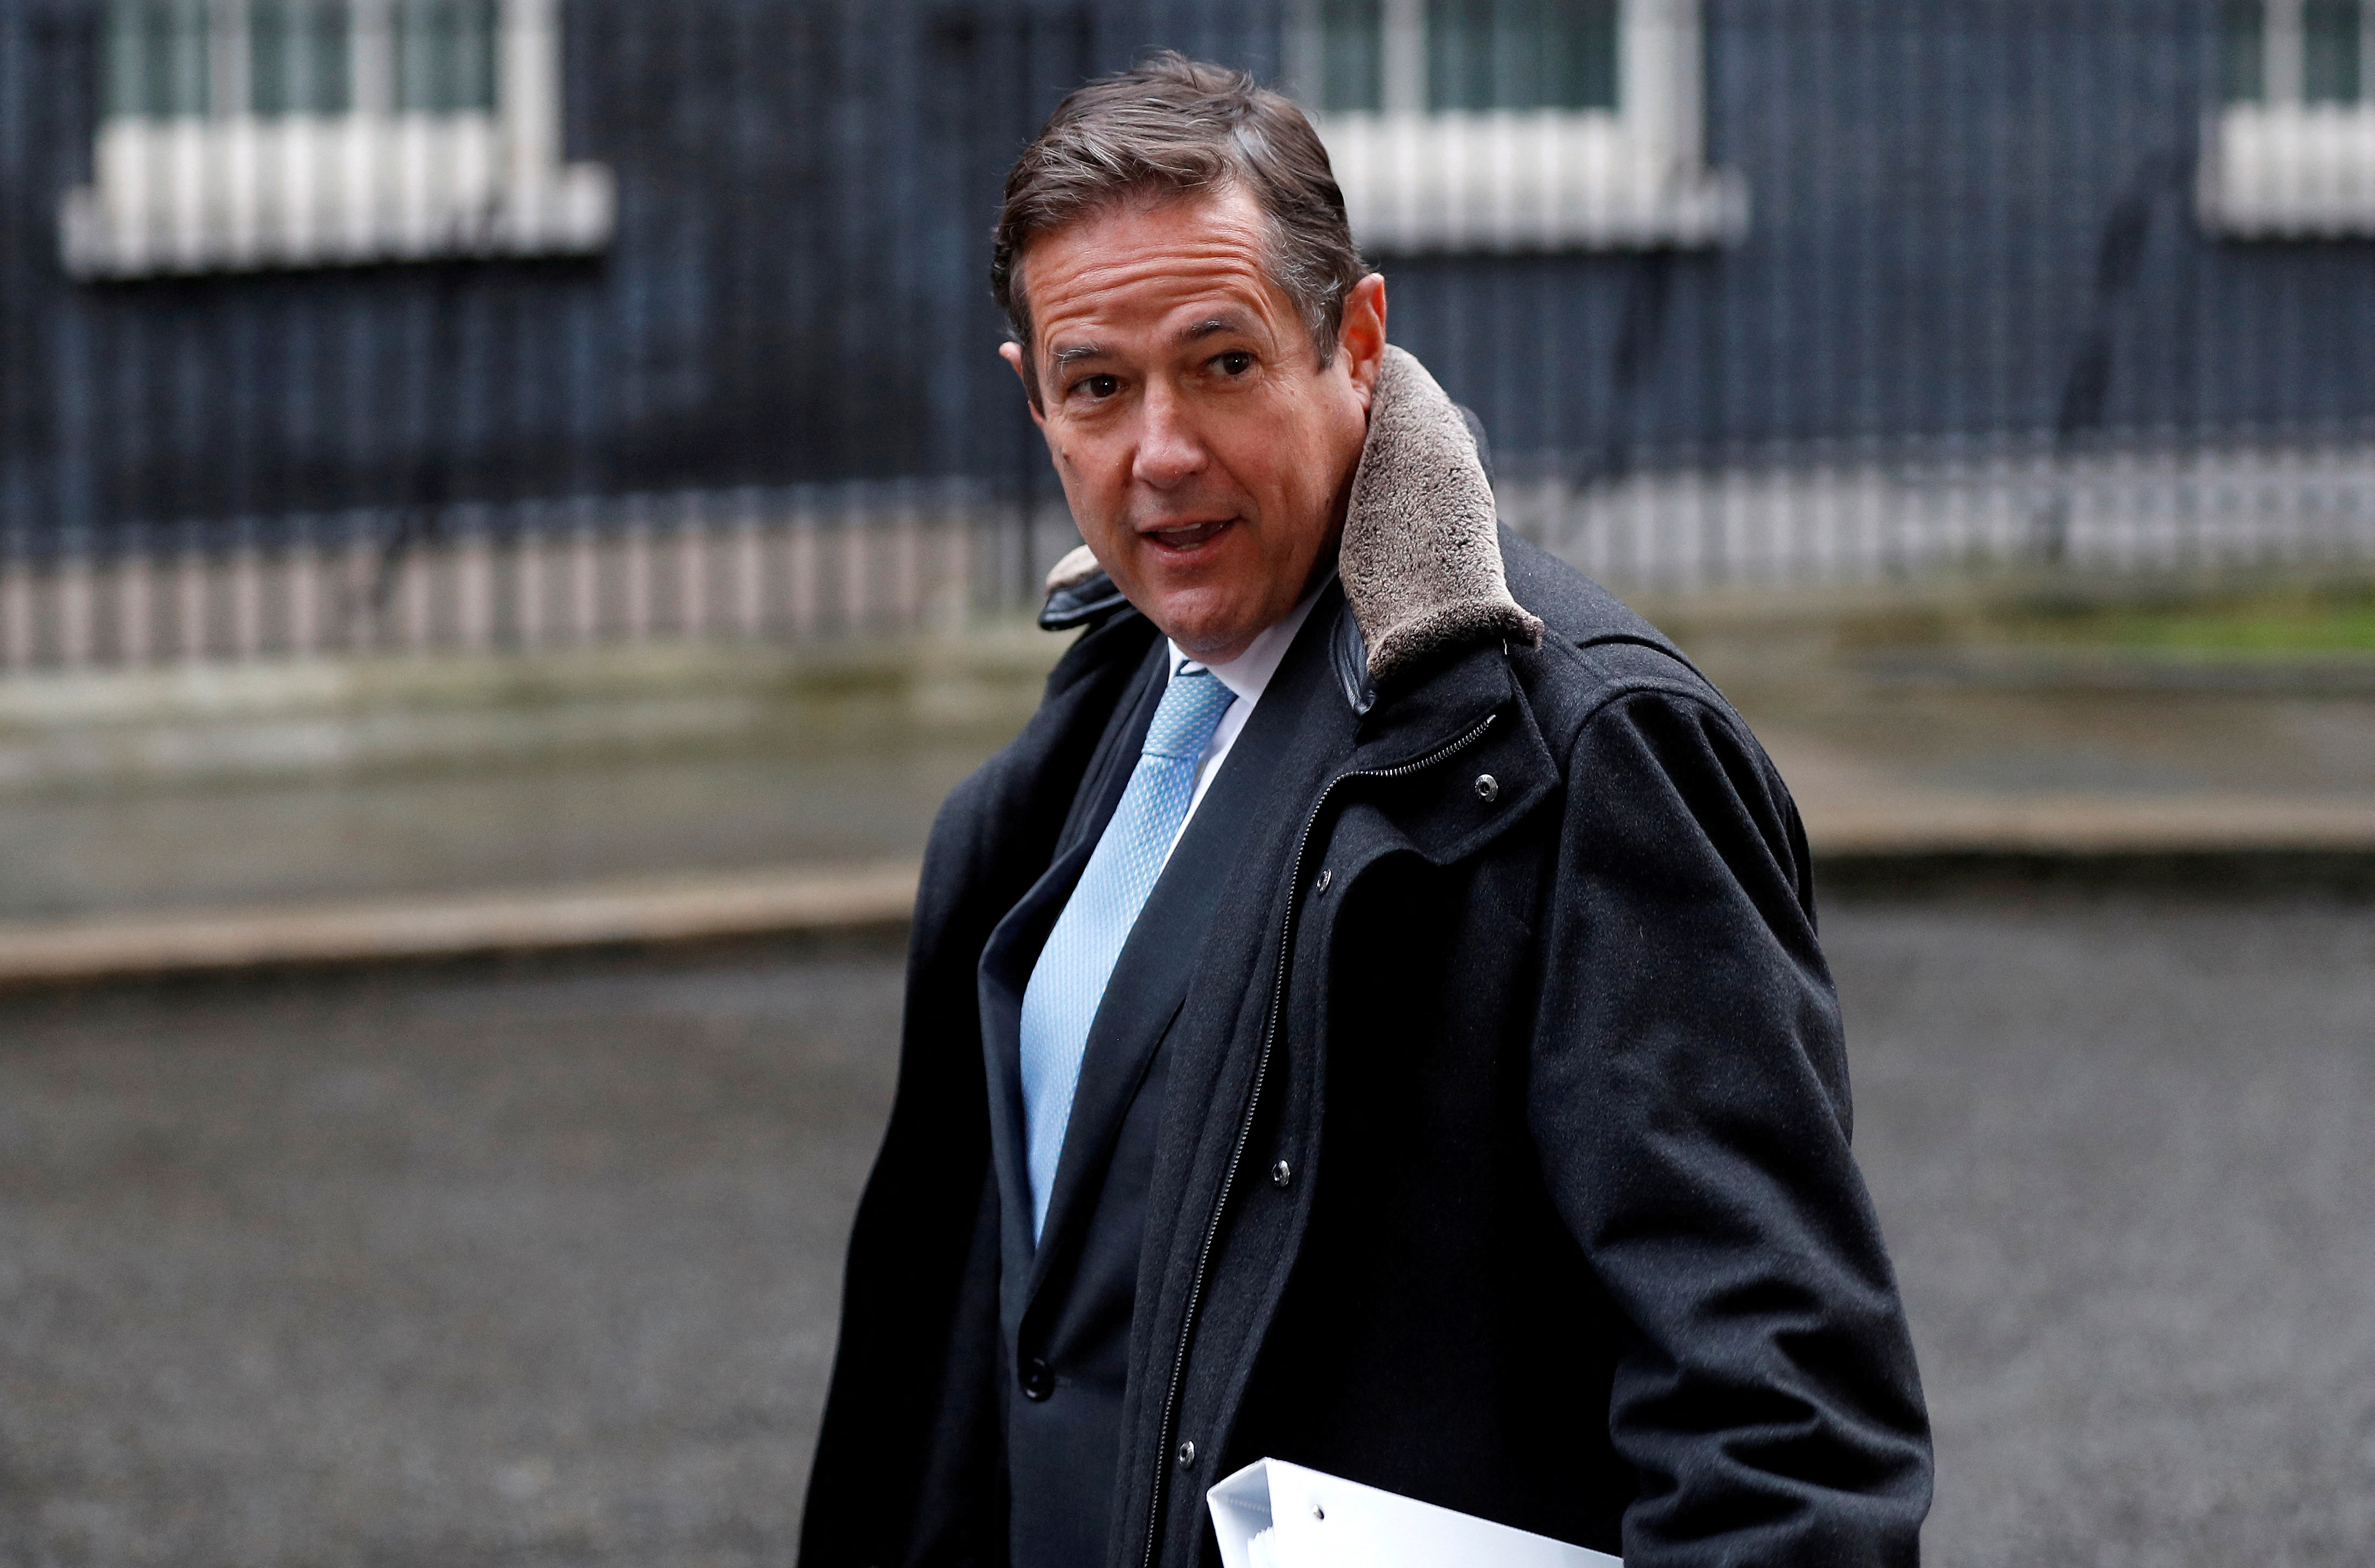 Then Barclays' CEO Jes Staley arrives at 10 Downing Street in London